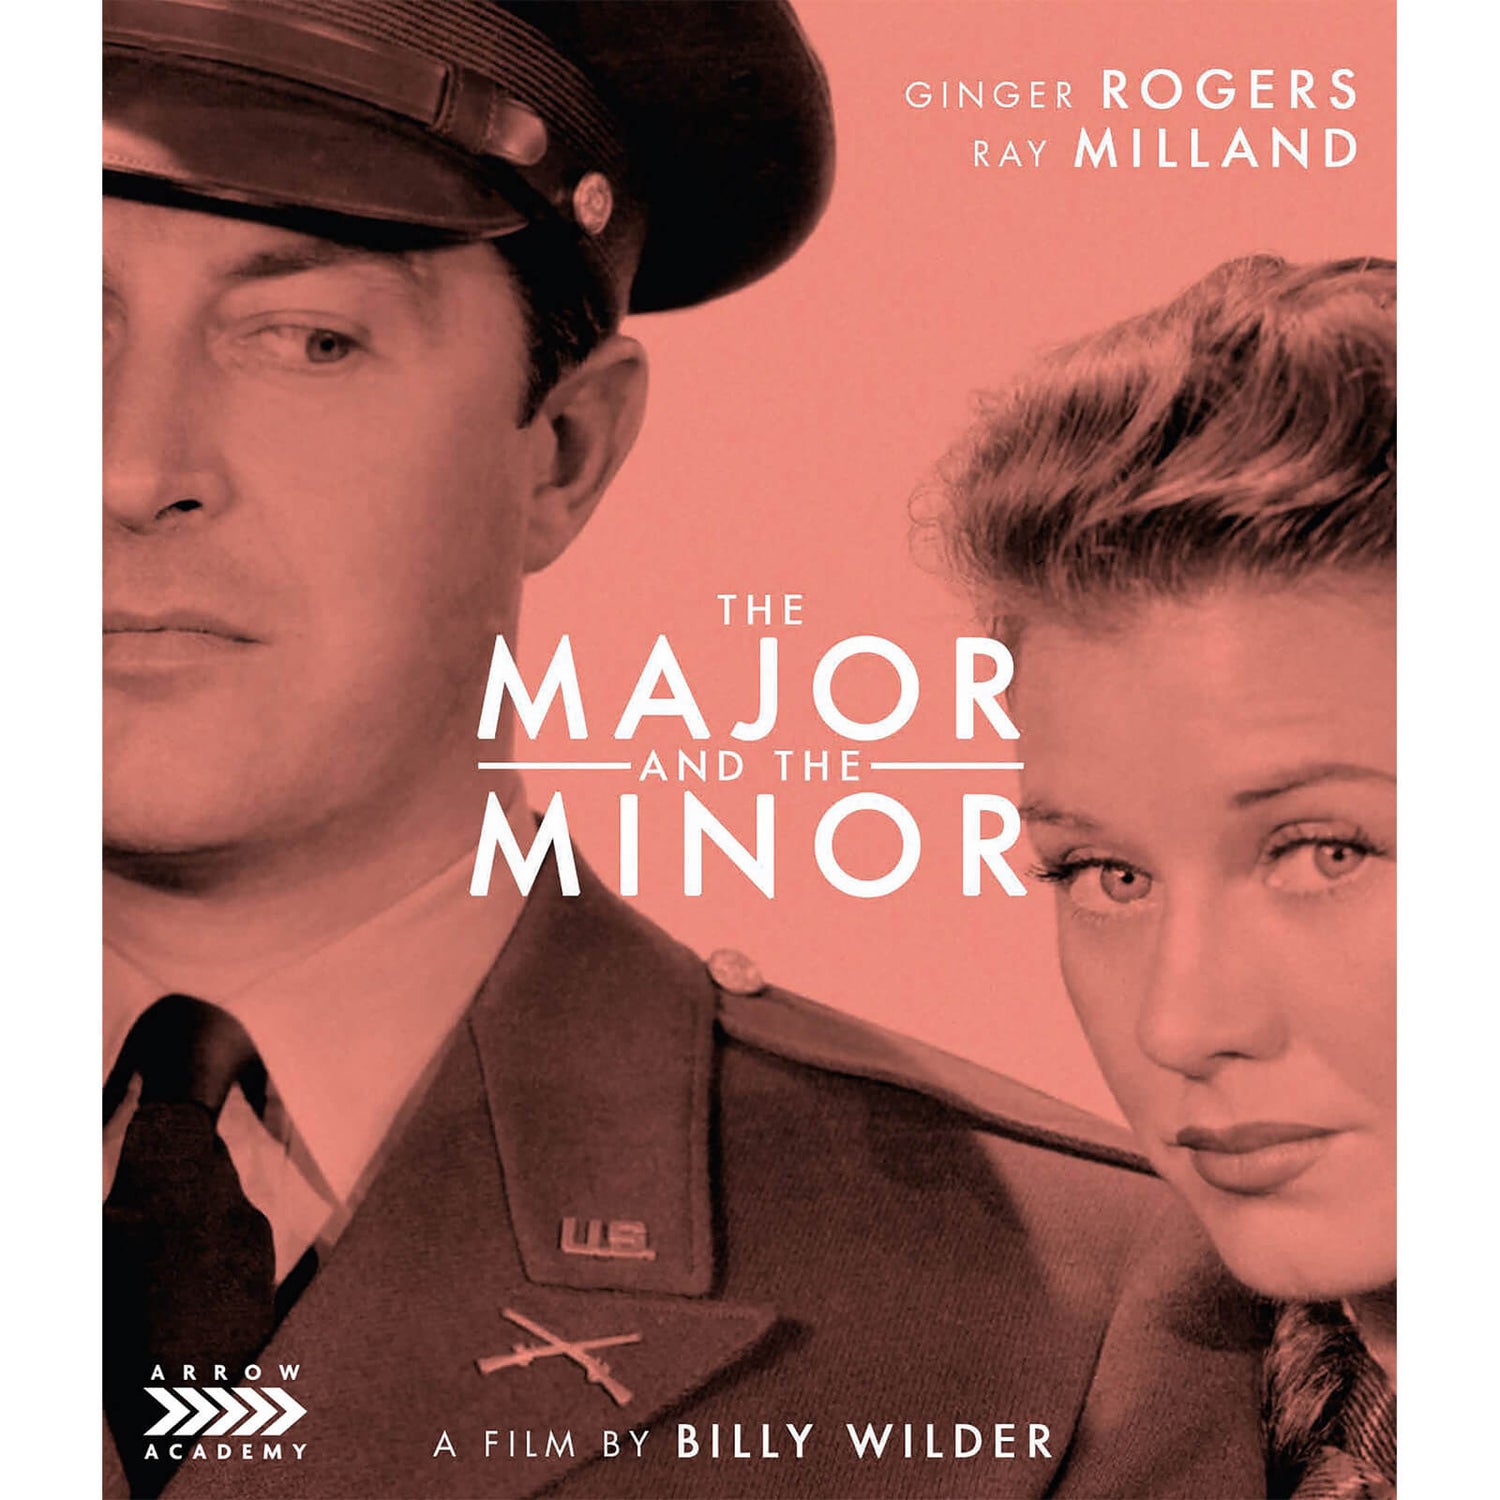 The Major And The Minor Blu-ray